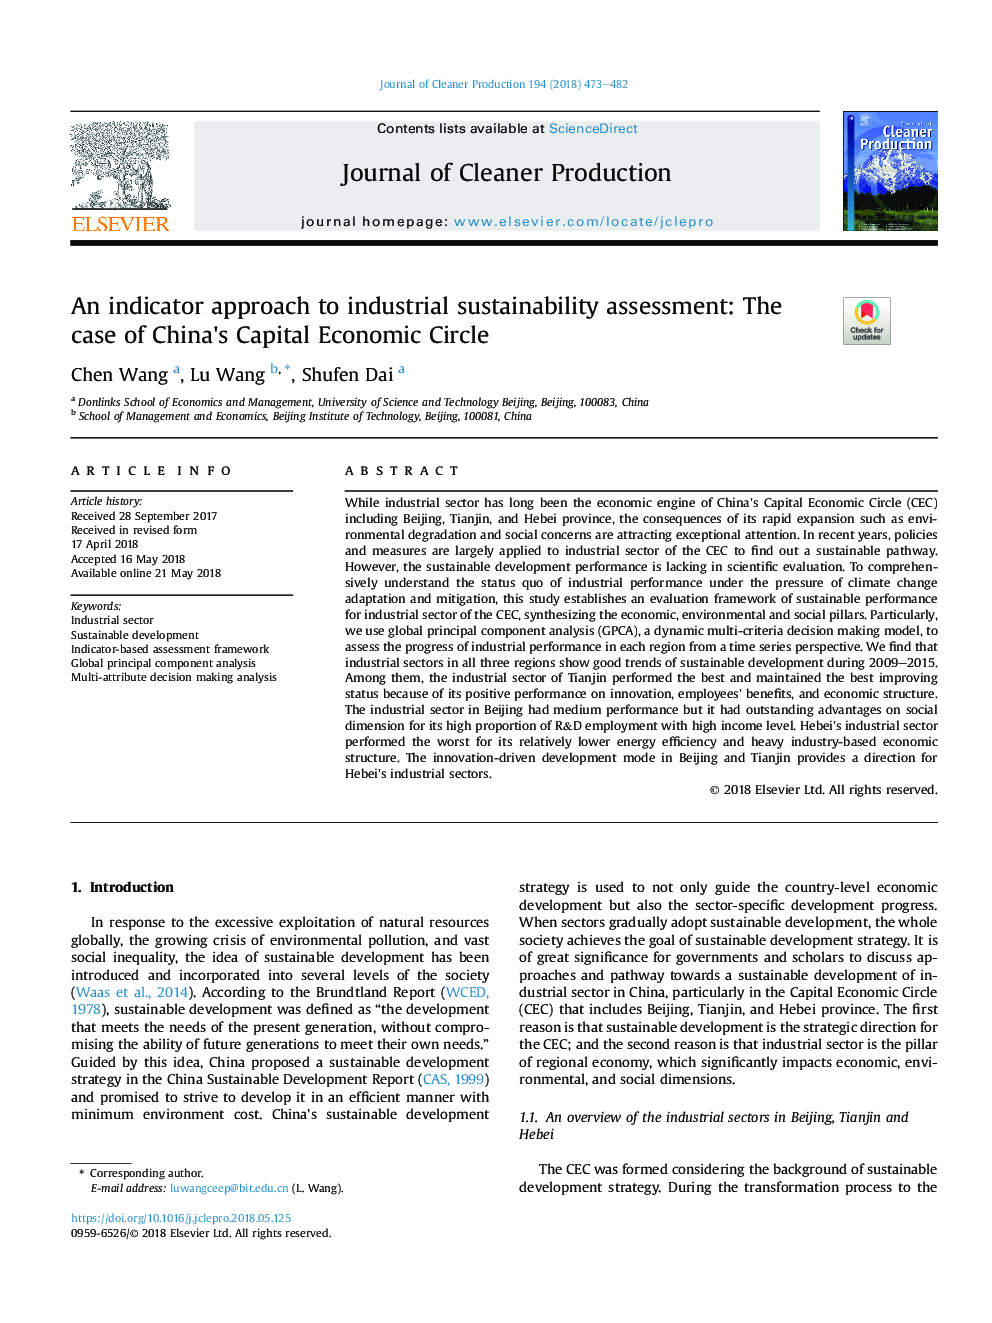 An indicator approach to industrial sustainability assessment: The case of China's Capital Economic Circle